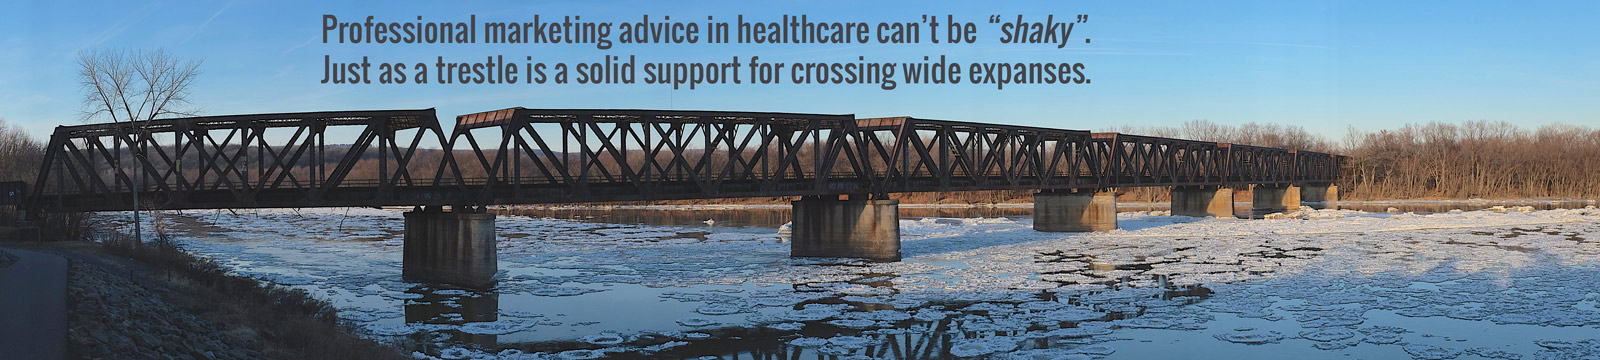 Professional marketing advice in healthcare can’t be “shaky”. Just as a trestle is a solid support for crossing wide expanses